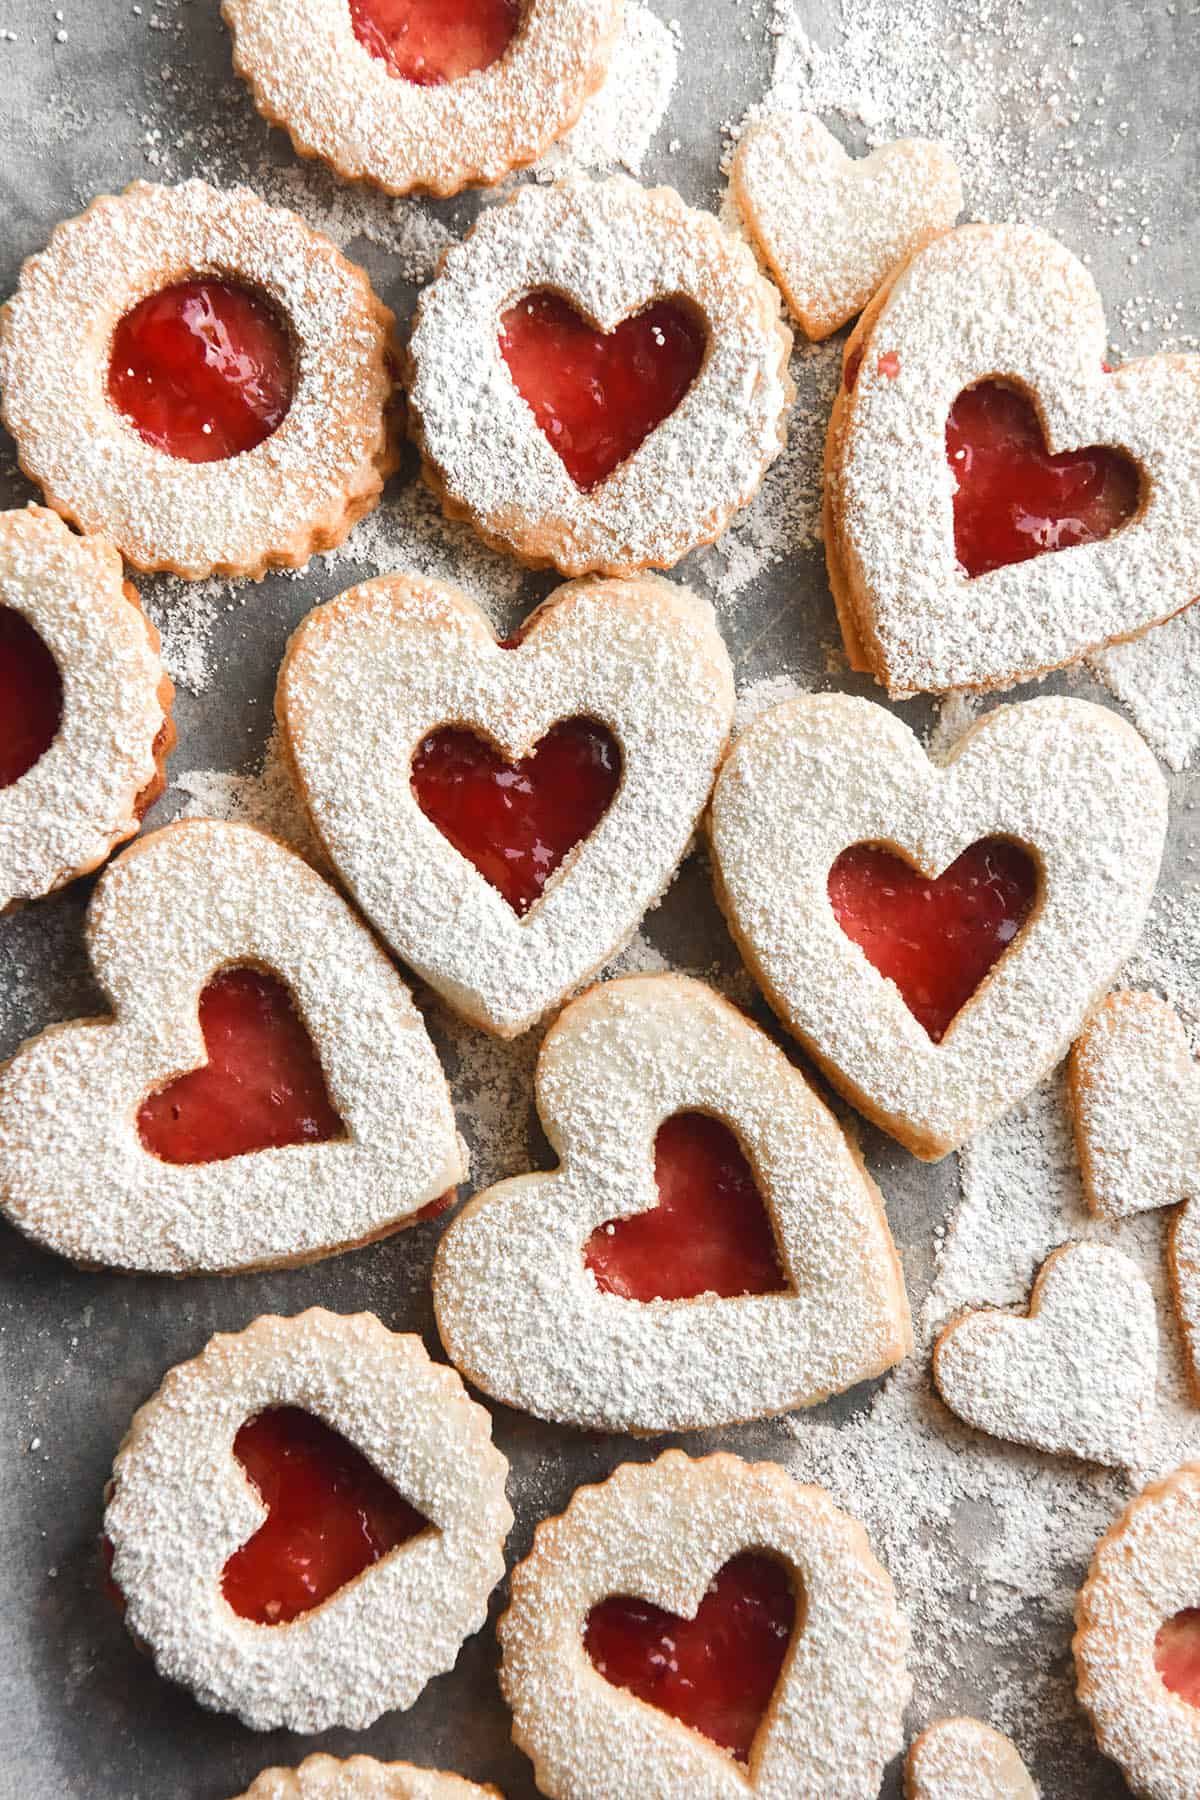 A light and airy image of a tray of gluten free linzer cookies filled with raspberry jam. The cookies are cut in heart shapes with a small heart cut out of the centre, exposing the jam filling. The top are dusted with icing sugar. 